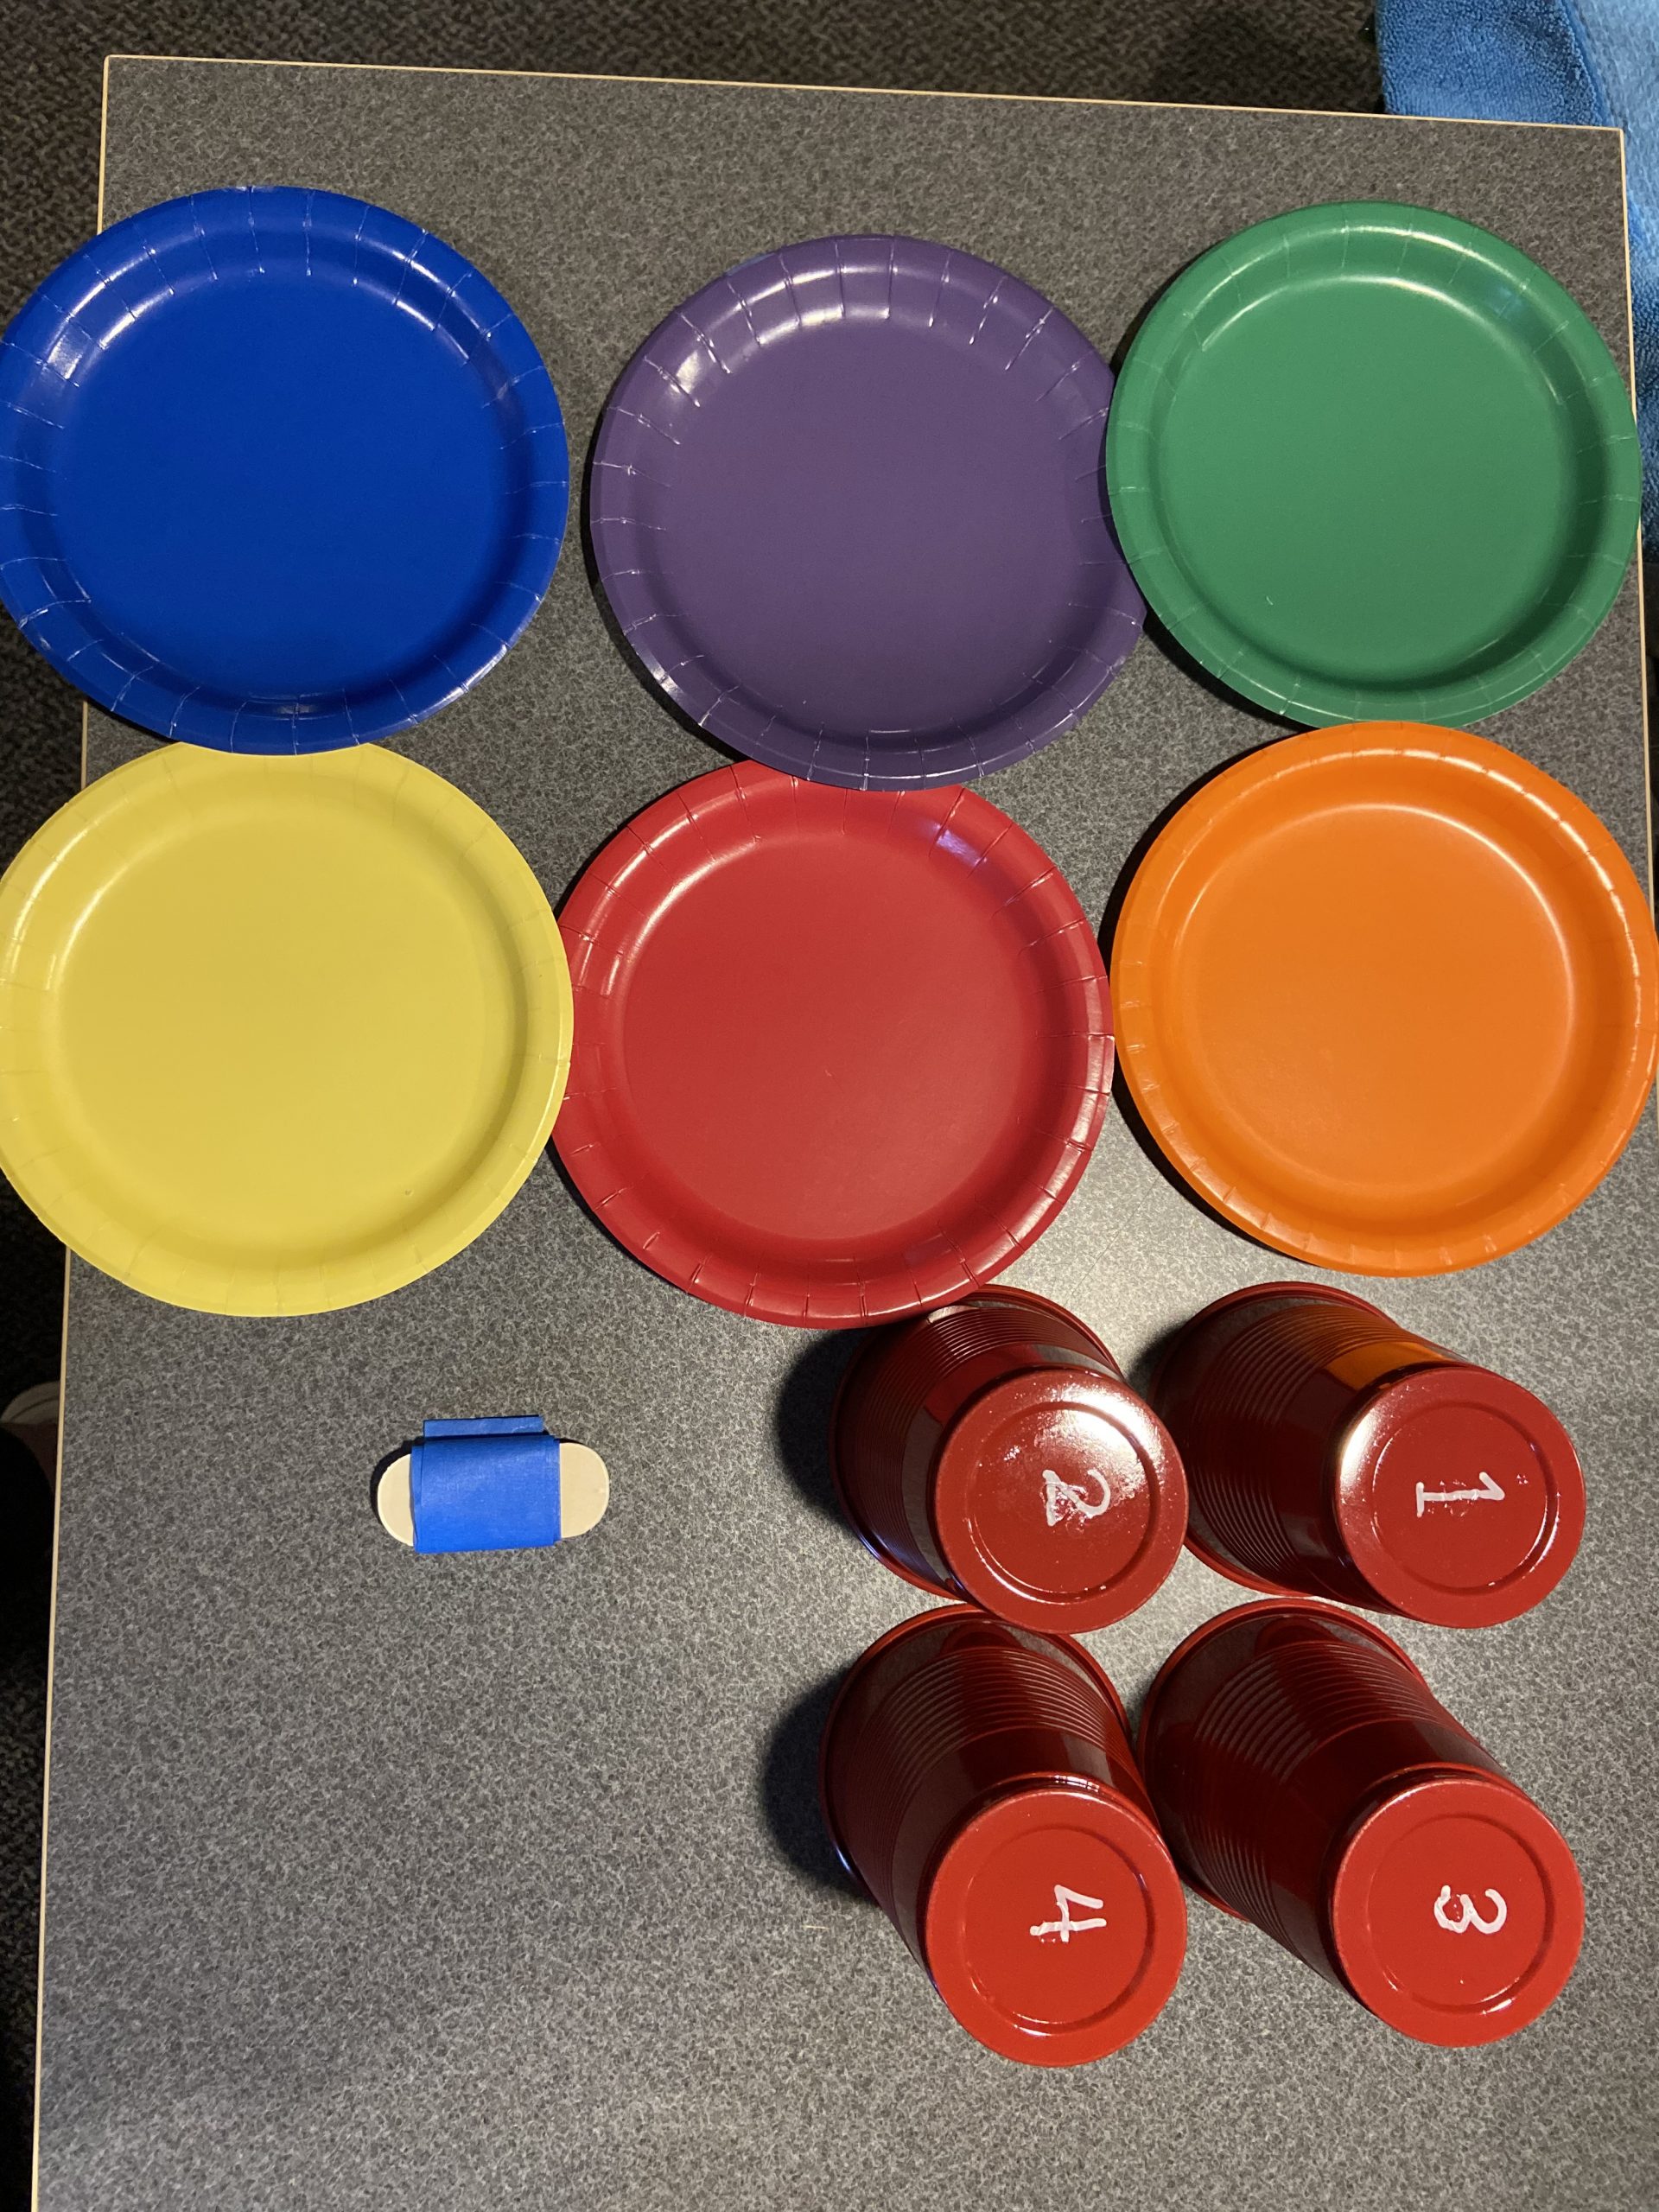 Photo of the supplies needed for the Balance and Brains virtual programming - colored paper plates, cups with numbers and blue painters tape